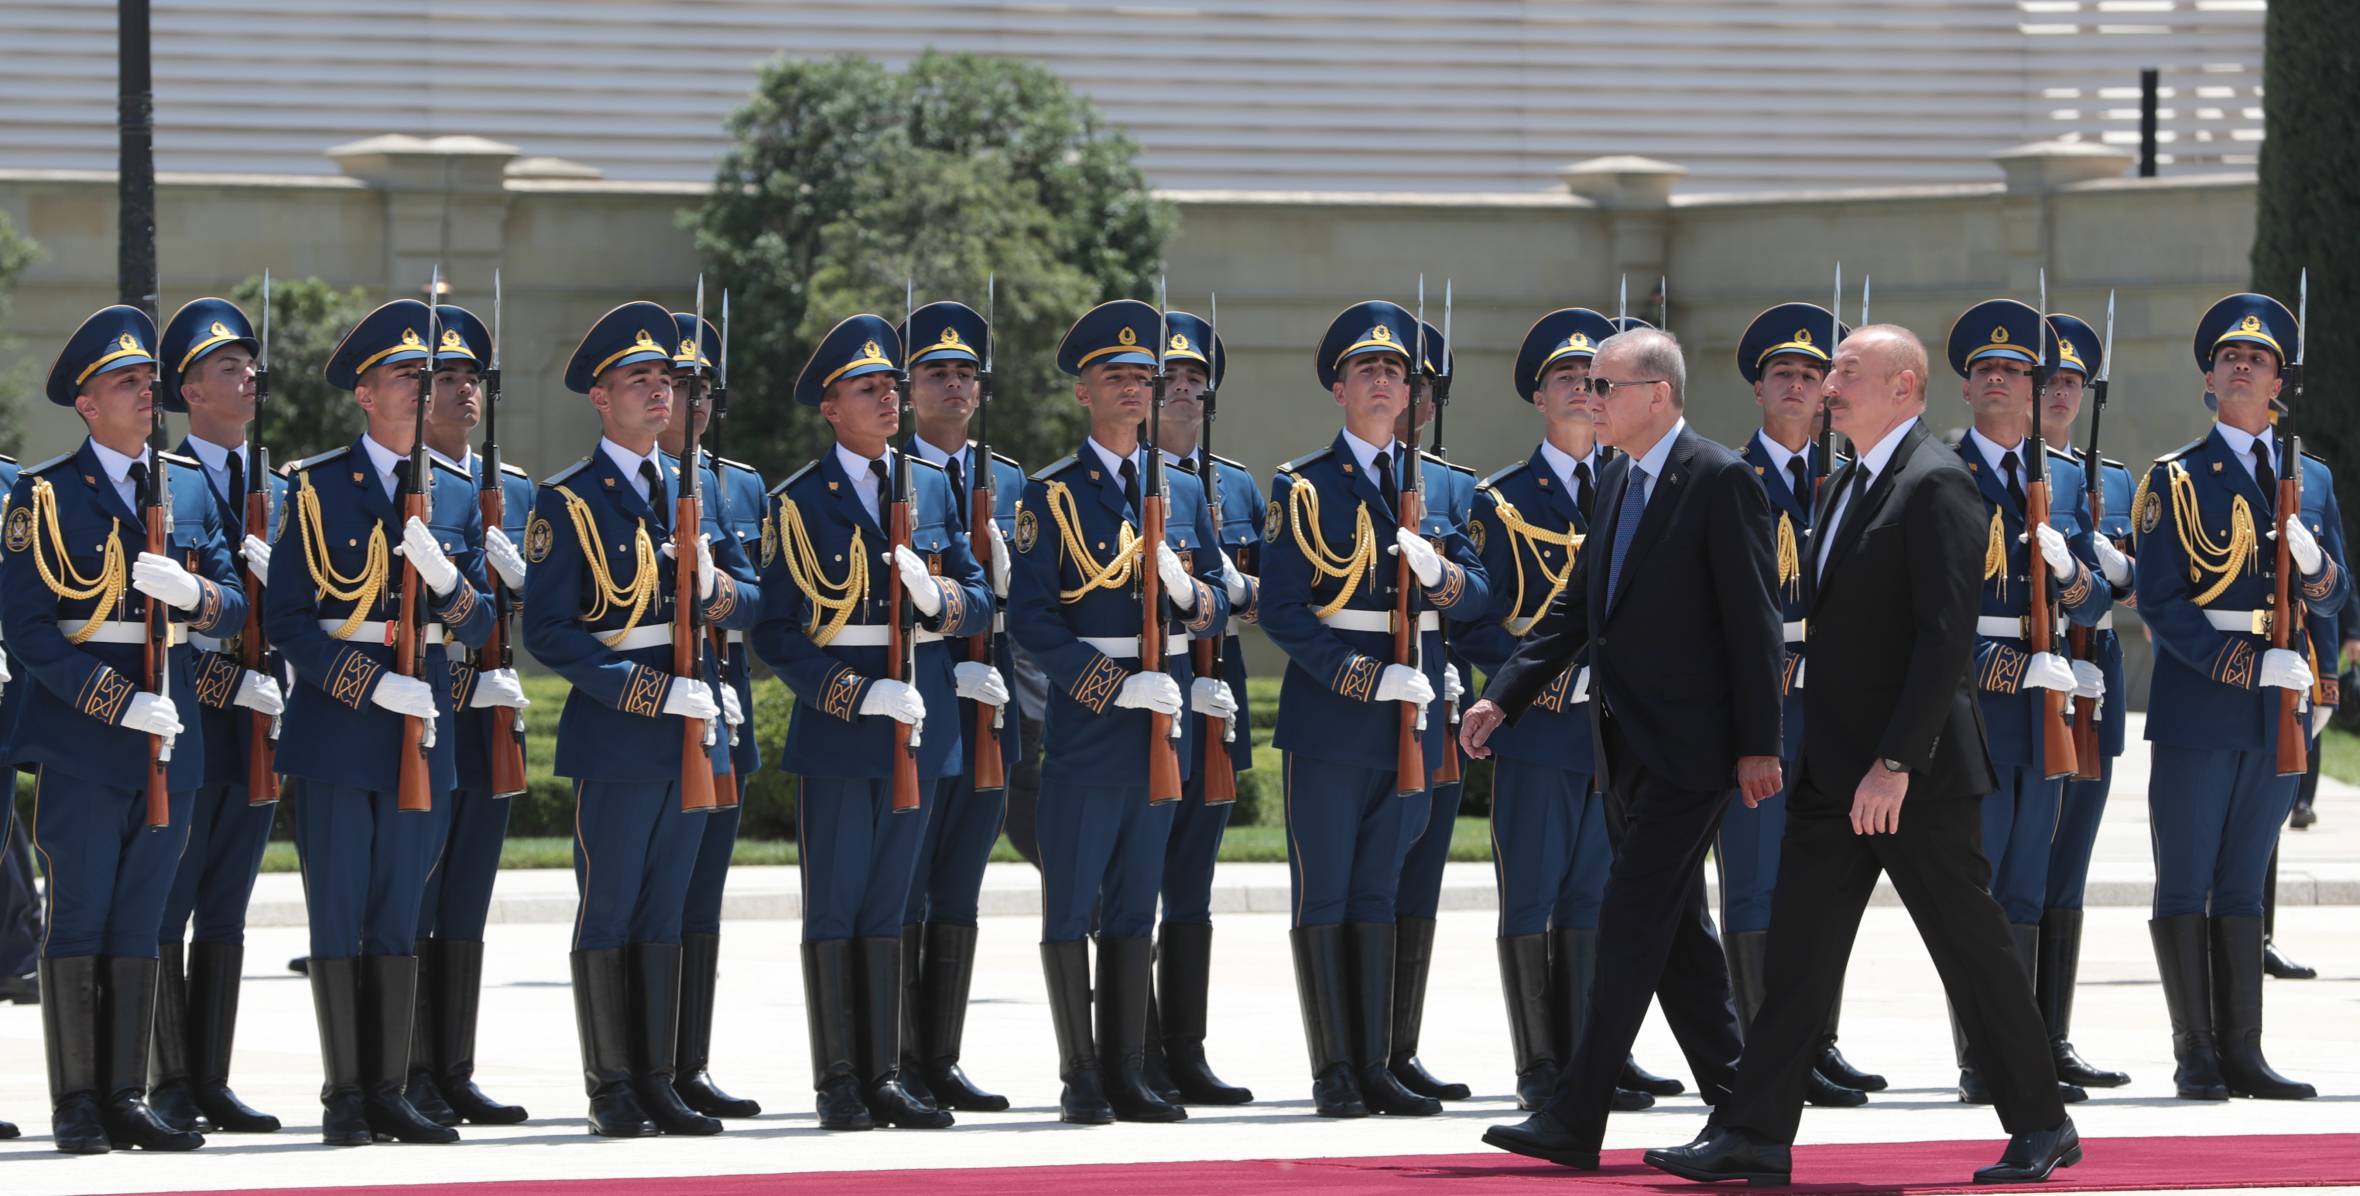 An official welcome ceremony has today been held for President of the Republic of Türkiye Recep Tayyip Erdogan